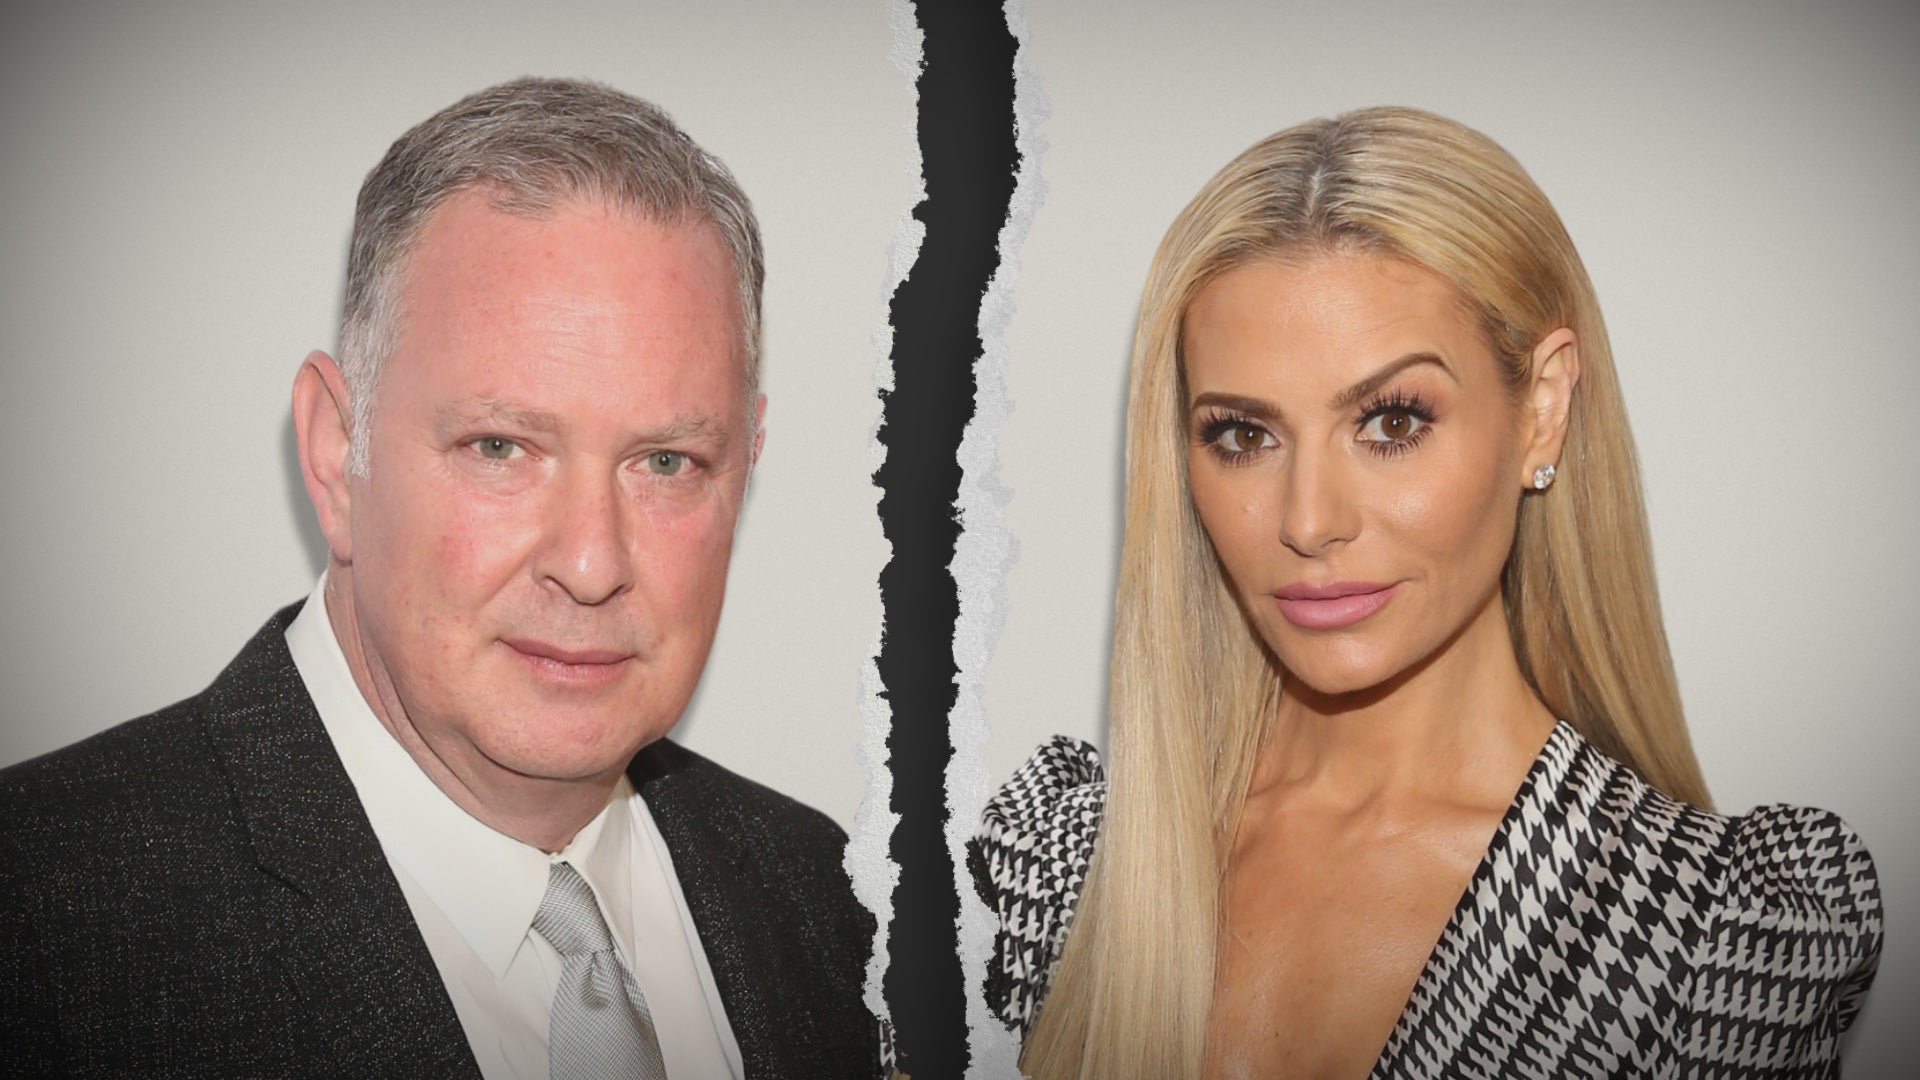 'RHOBH' Star Dorit Kemsley Splits From Husband PK After 9 Years of Marriage